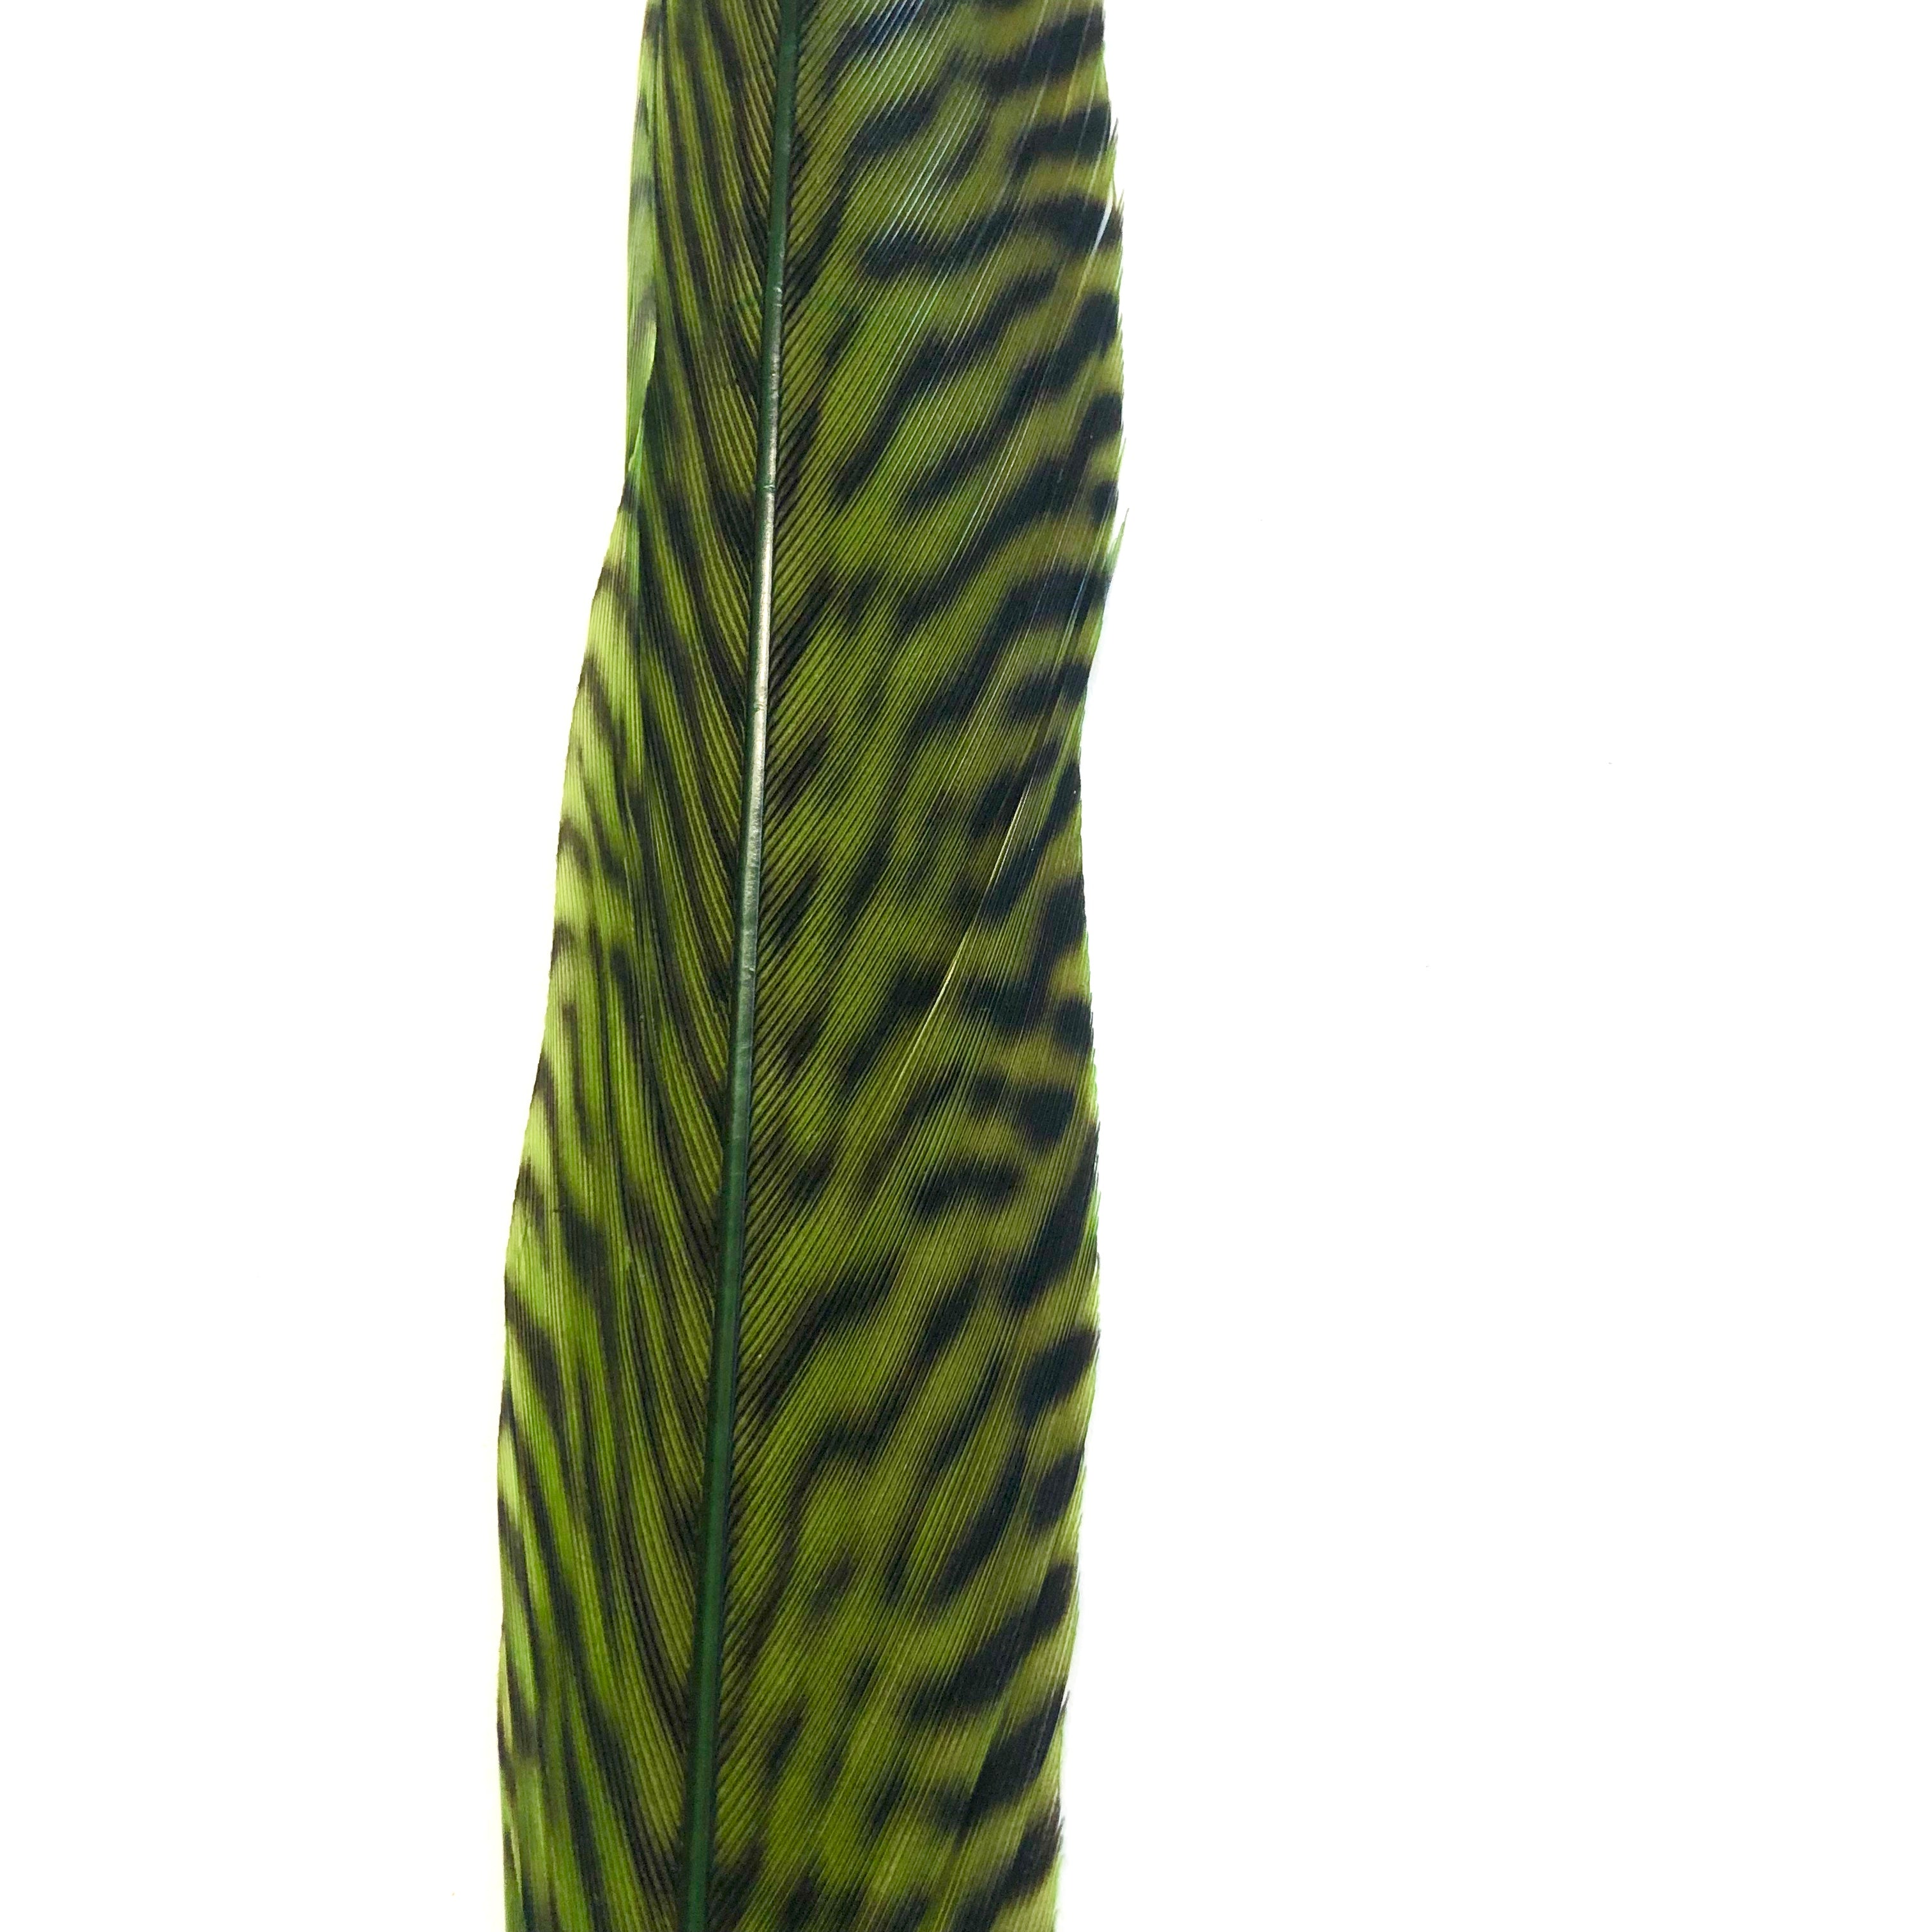 10" to 20" Golden Pheasant Side Tail Feather - Lime Green